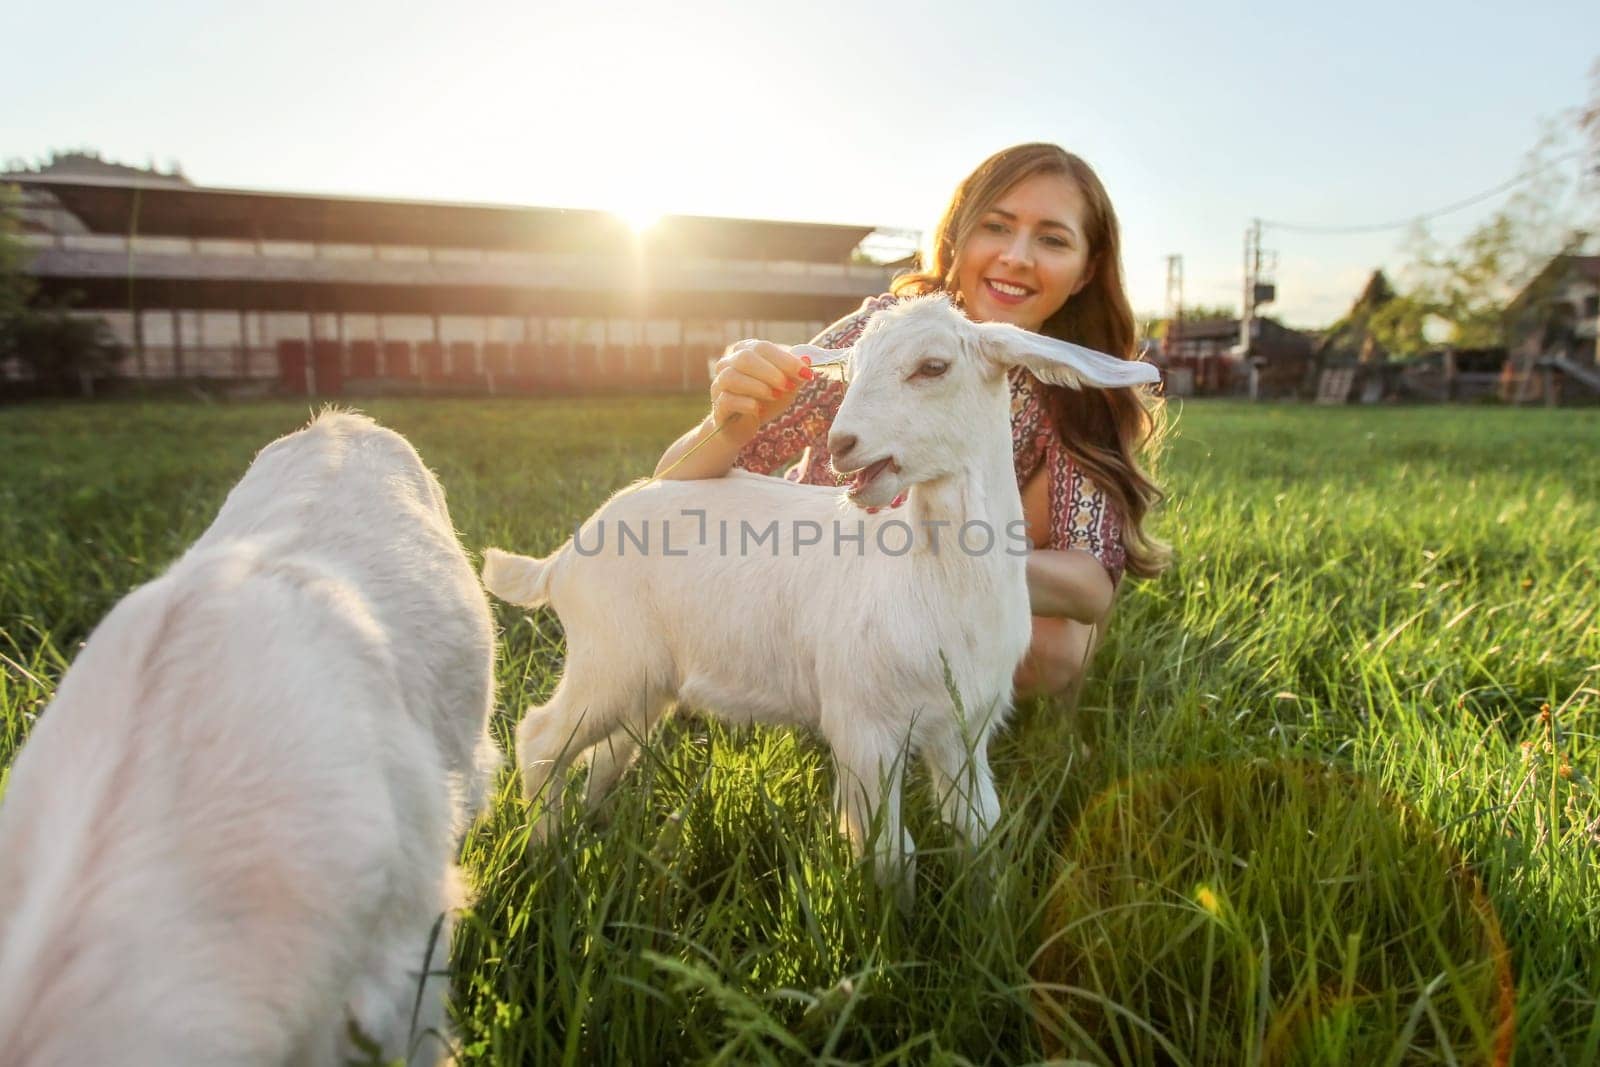 Young woman plays with goat kids, feeding them, sun shining over farm in background. by Ivanko